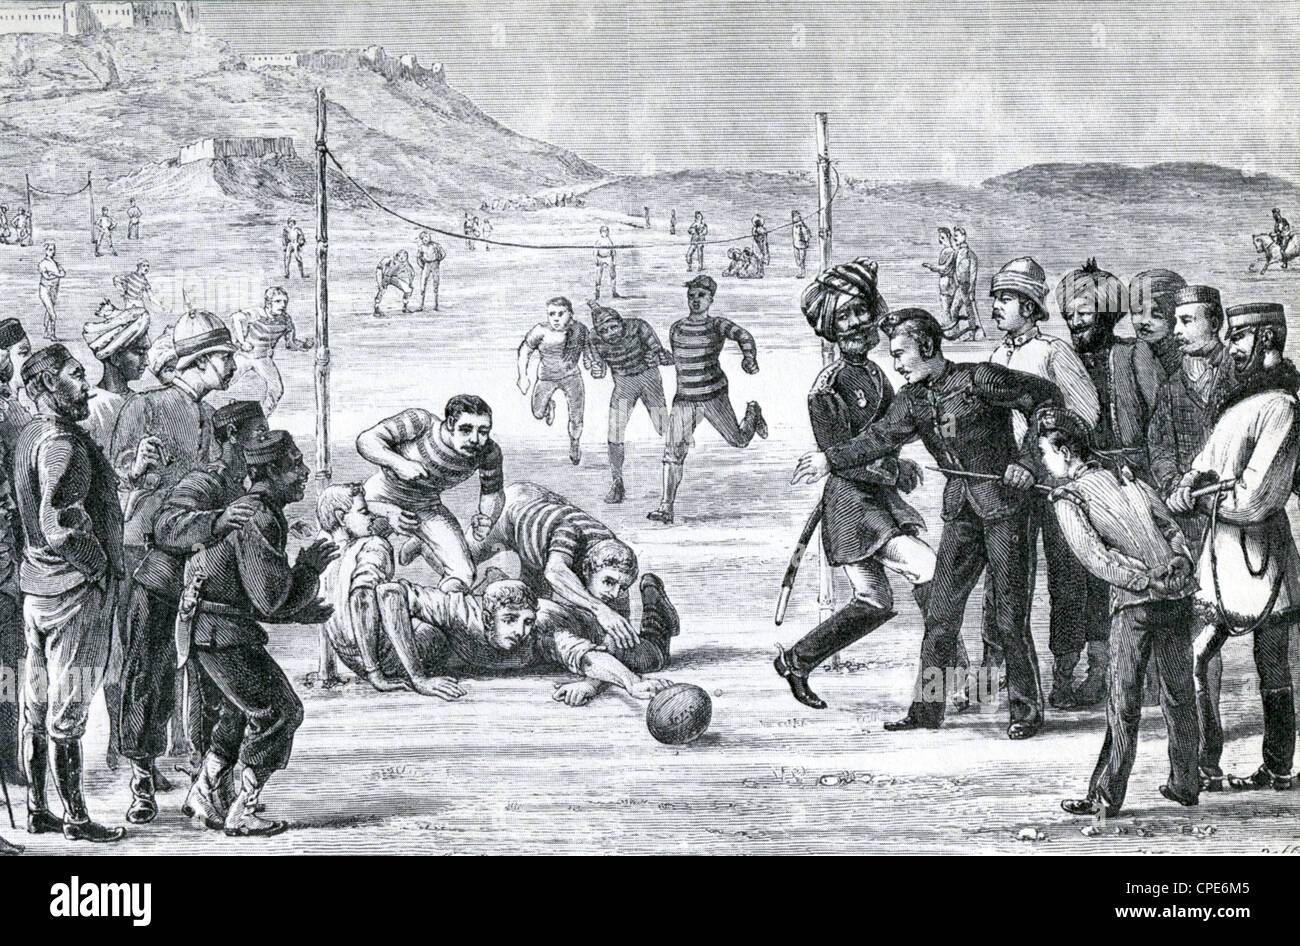 SECOND ANGLO-AFGHAN WAR (1878-1880)  Regimental rugby ootball match in 1879 watched by soldiers from Indian, Gurkha regiments Stock Photo